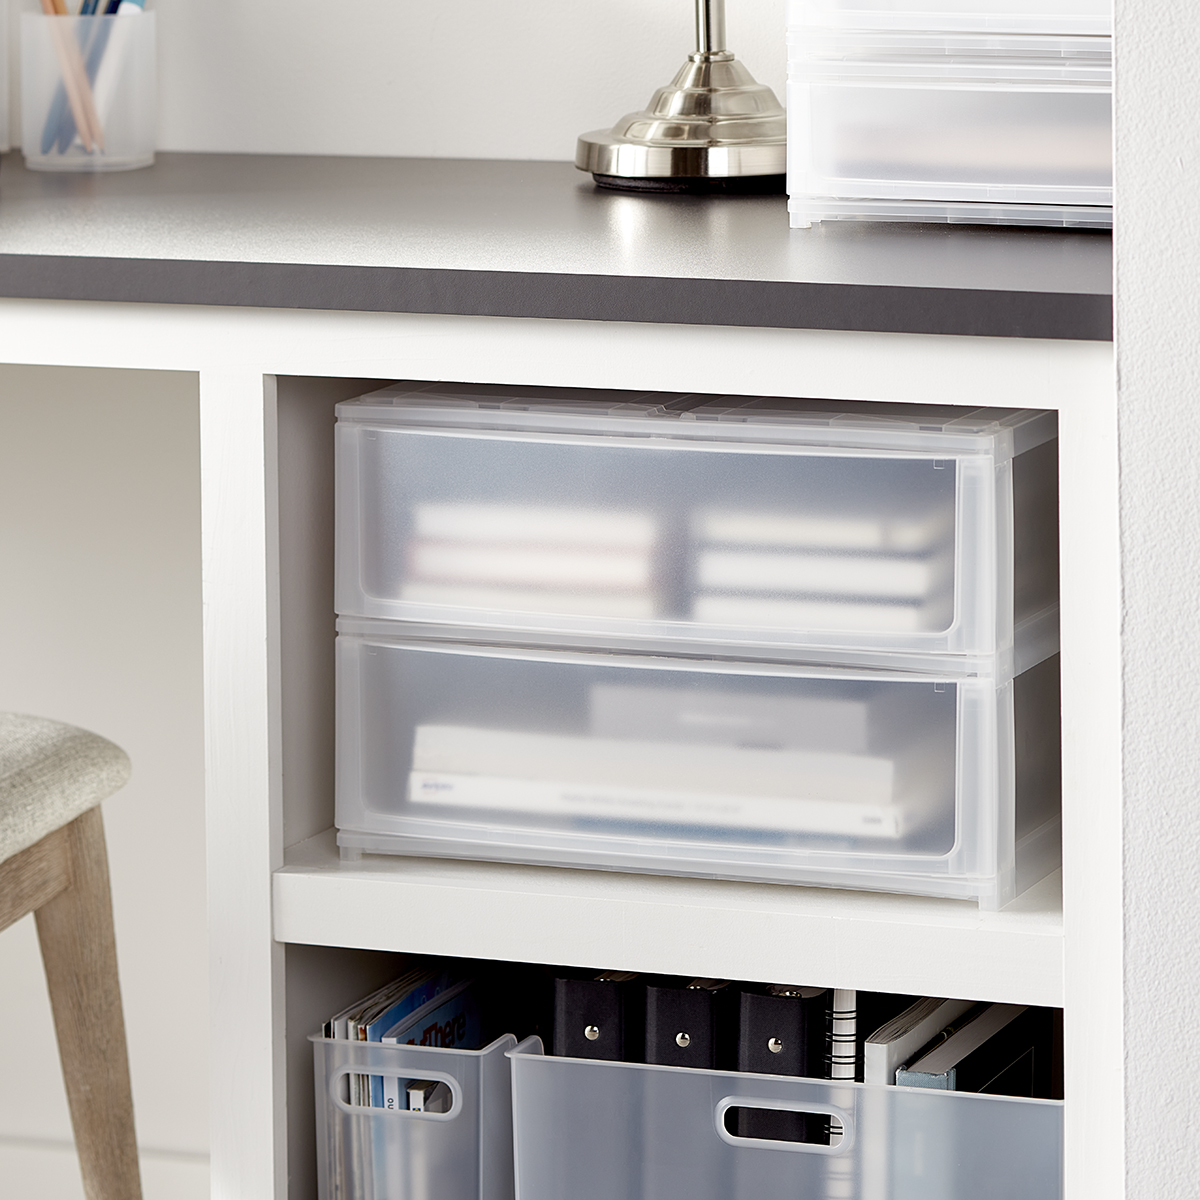 https://www.containerstore.com/catalogimages/434653/10079319_Shimo_large_stacking_drawer.jpg